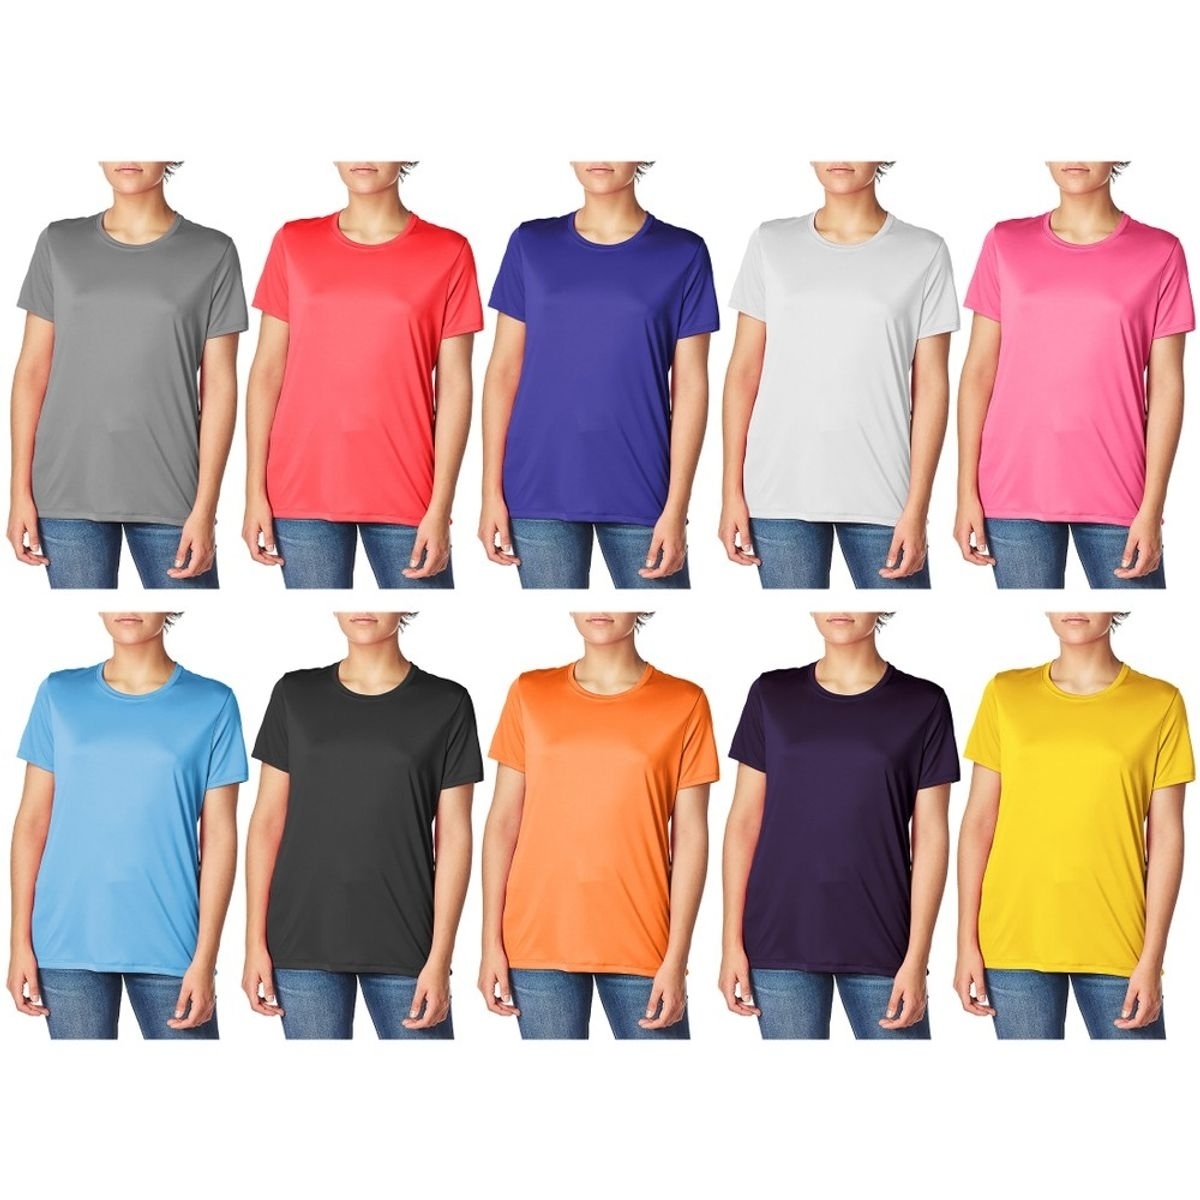 3-Pack: Women's Cool Dri-FIt Moisture Wicking Sim-Fit Long Sleeve Crew Neck T-Shirts - Small